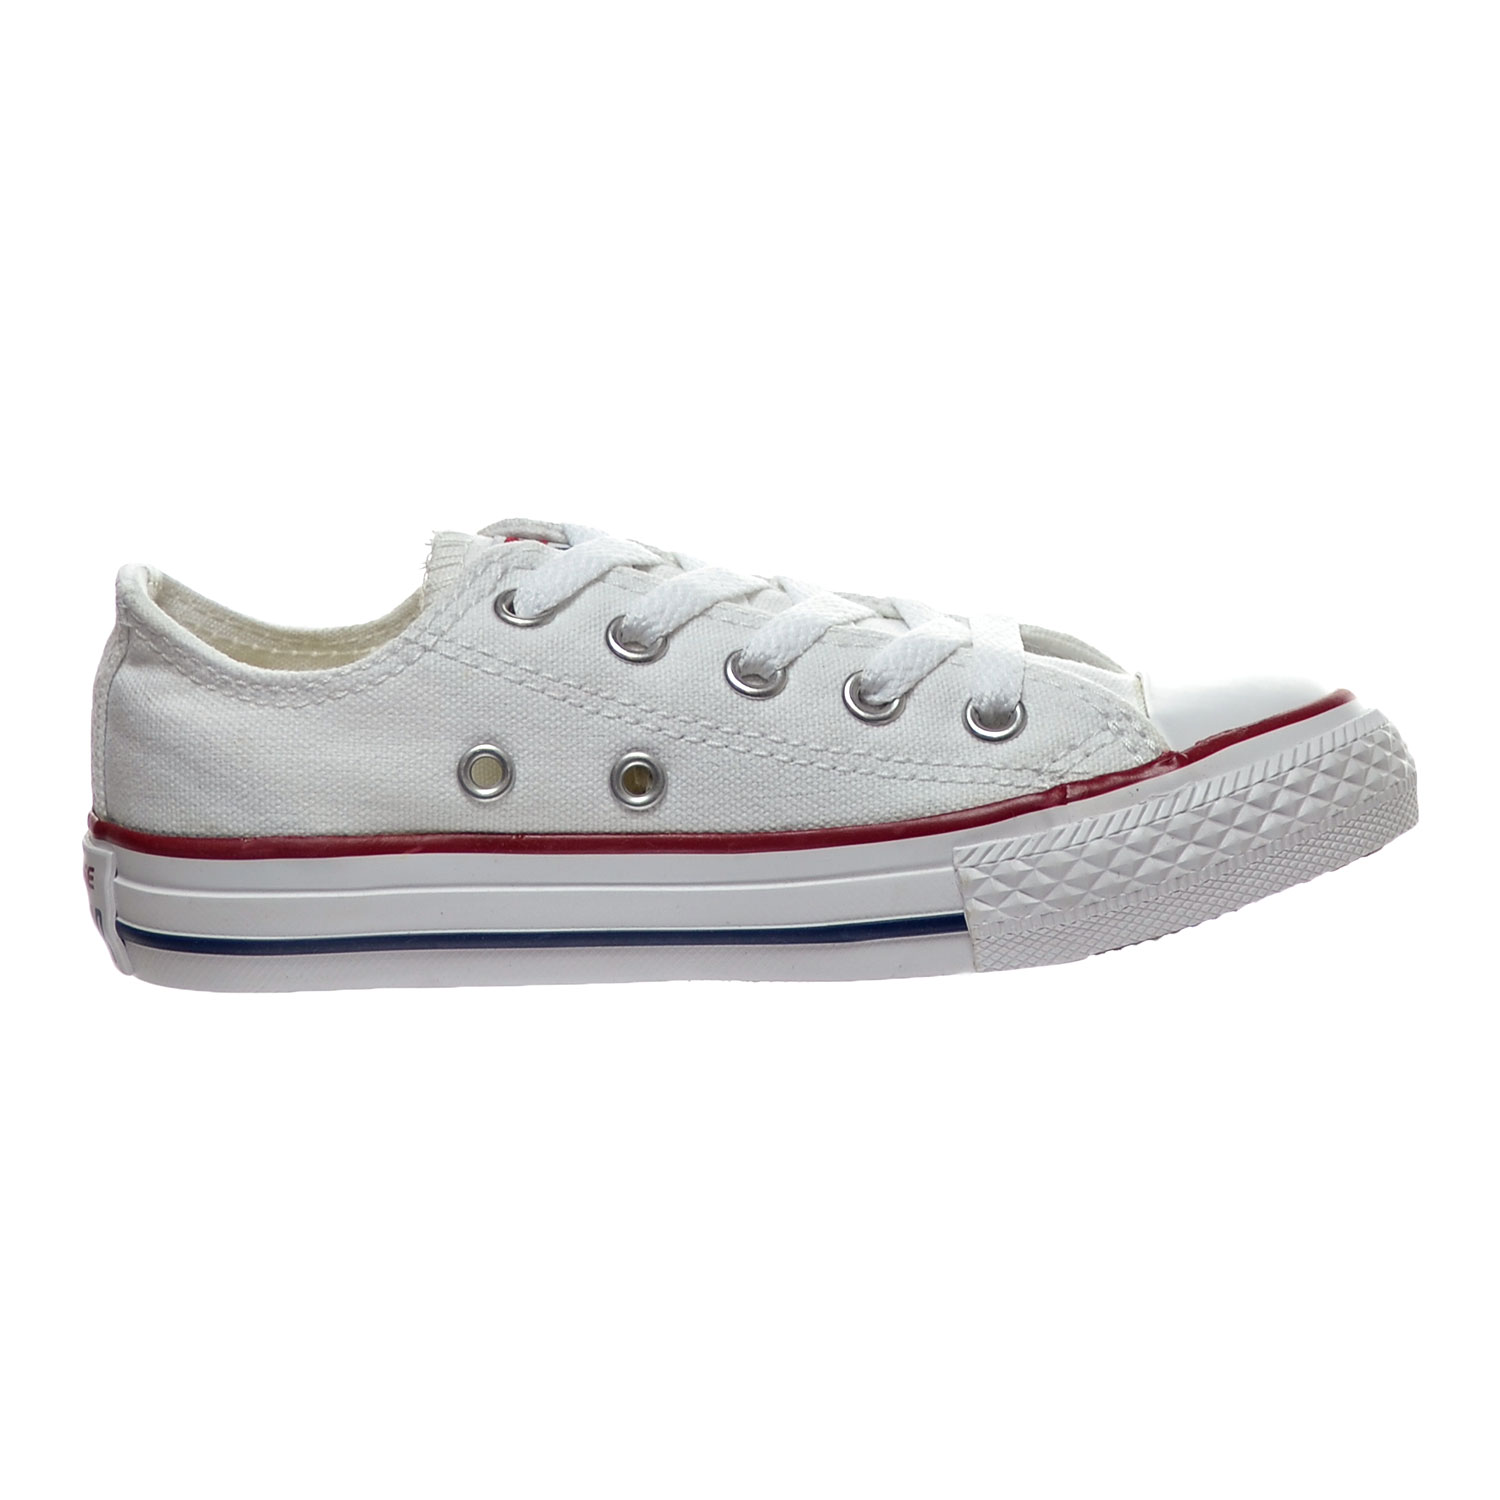 Converse Chuck Taylor All Star Optical White Little Kid's Shoes 3j256 (10.5 M US)